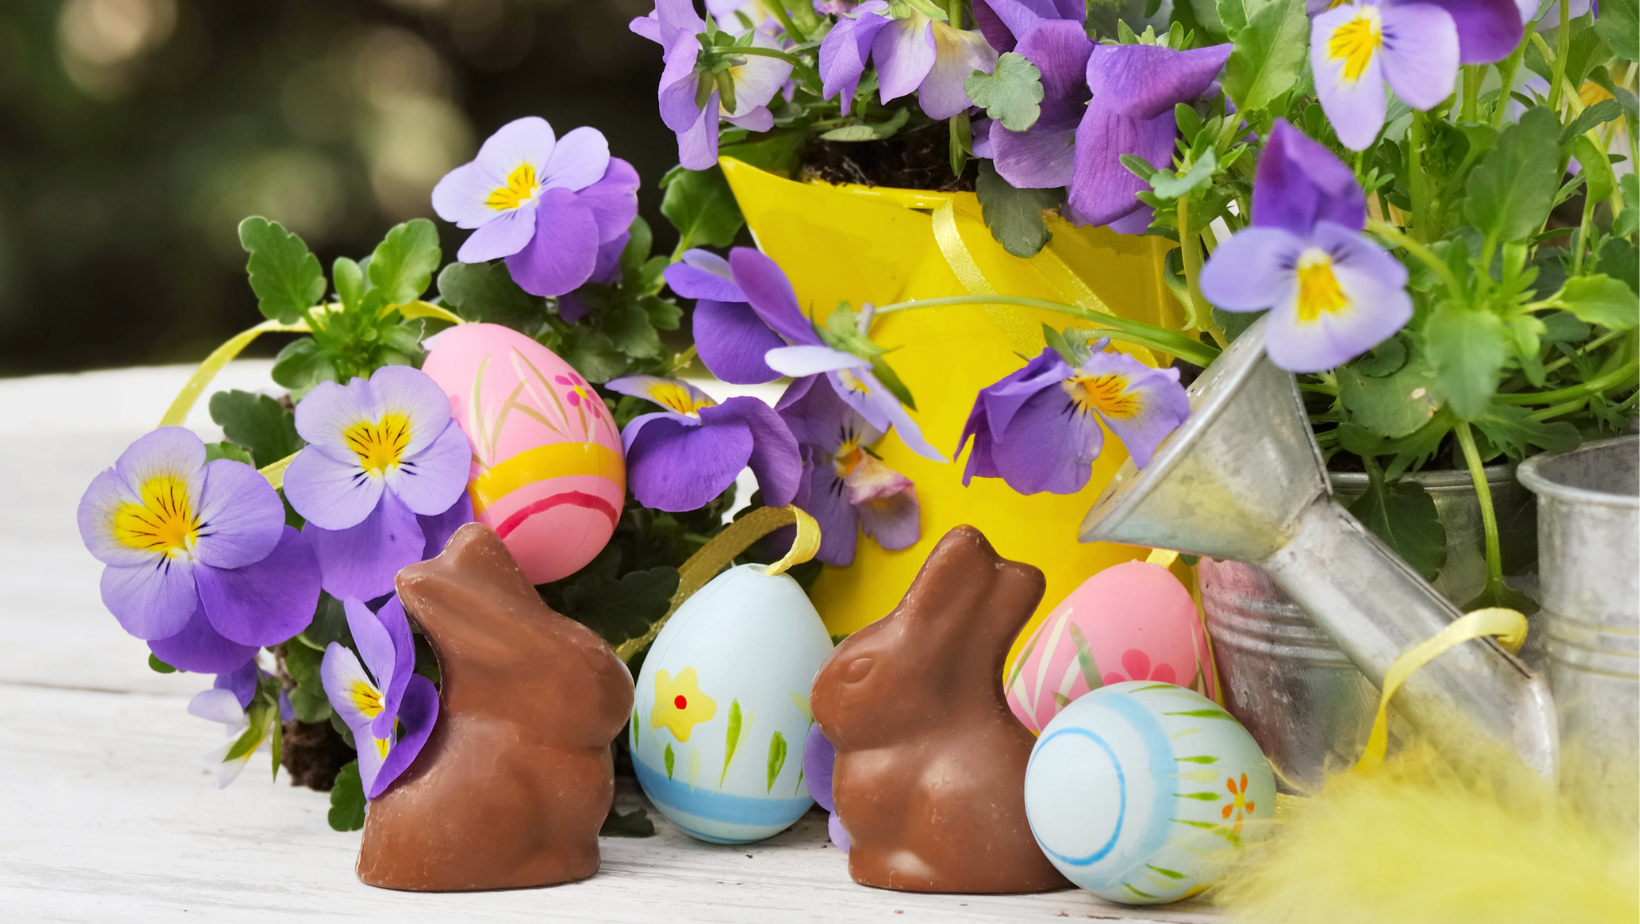 Get Your Garden Ready for an Easter Egg Hunt